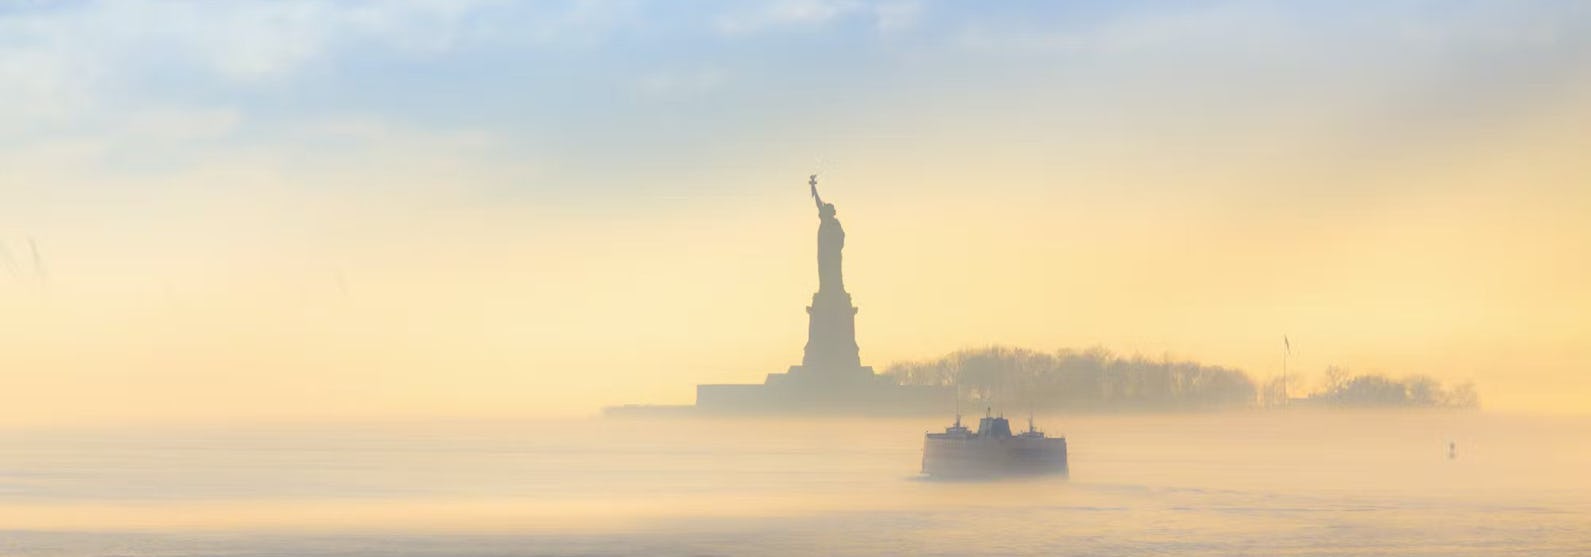 Cruises from New York alongside the statue of liberty